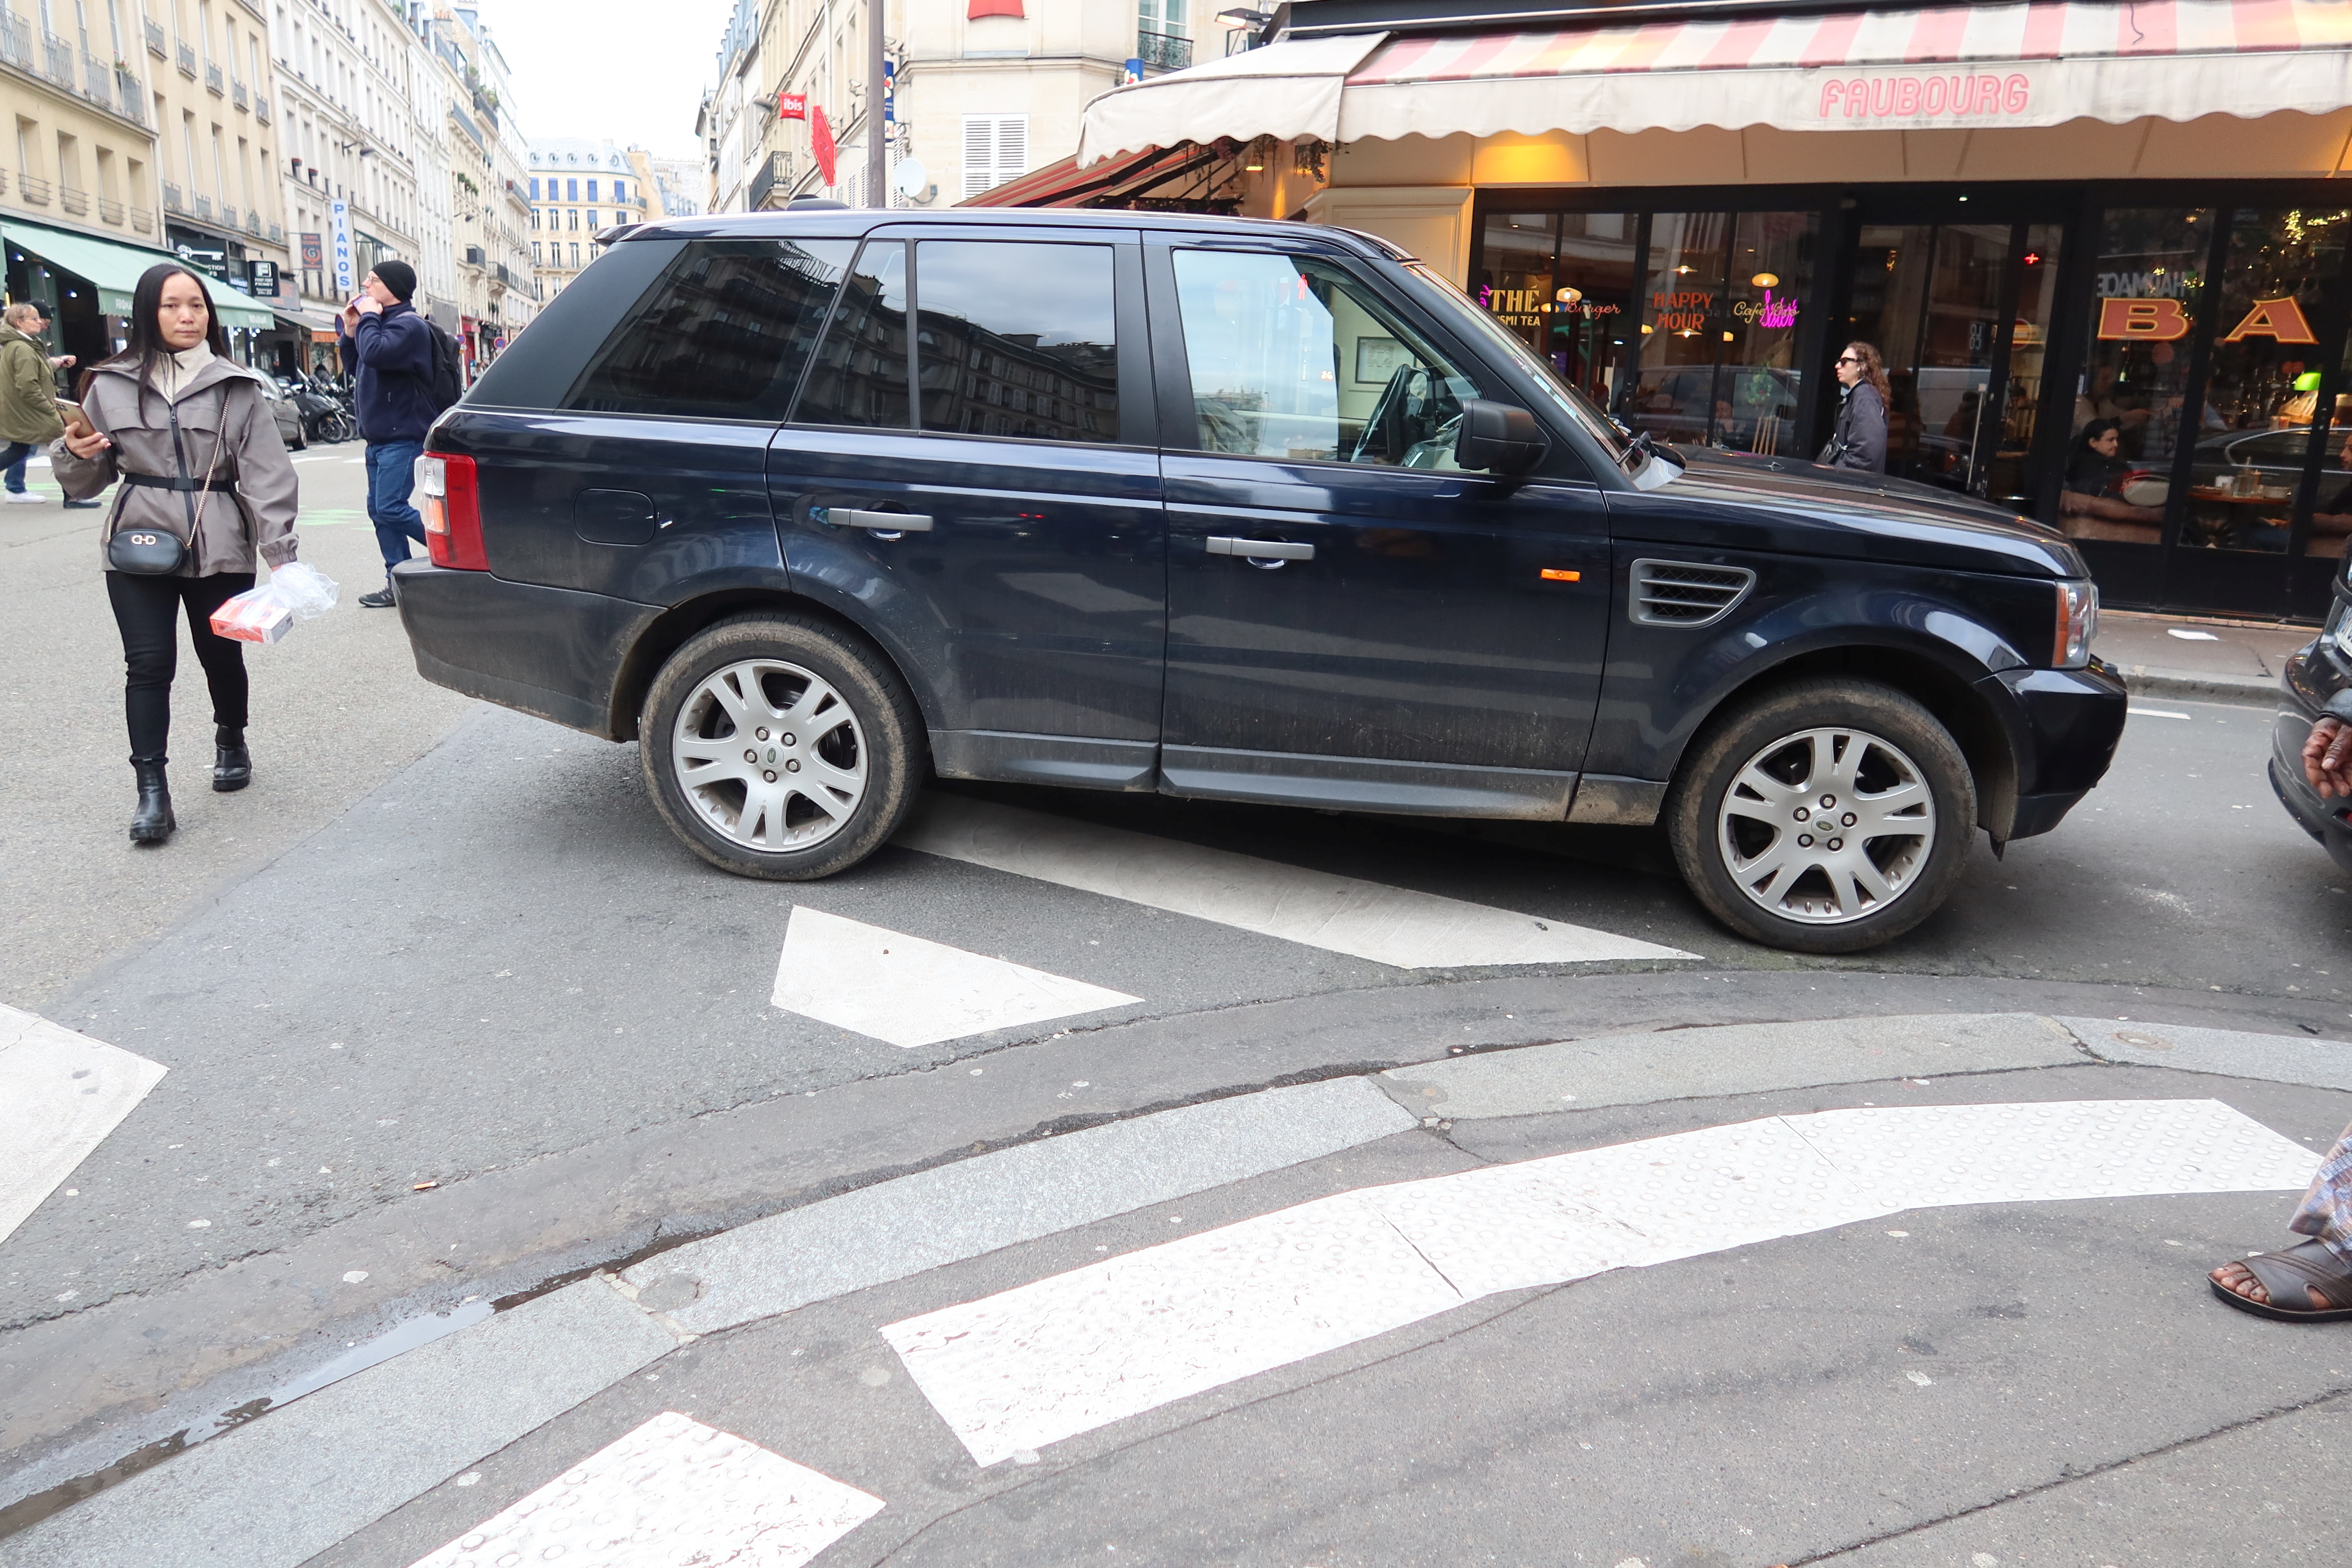 Commentary: The Street Fight Over SUVs in Paris